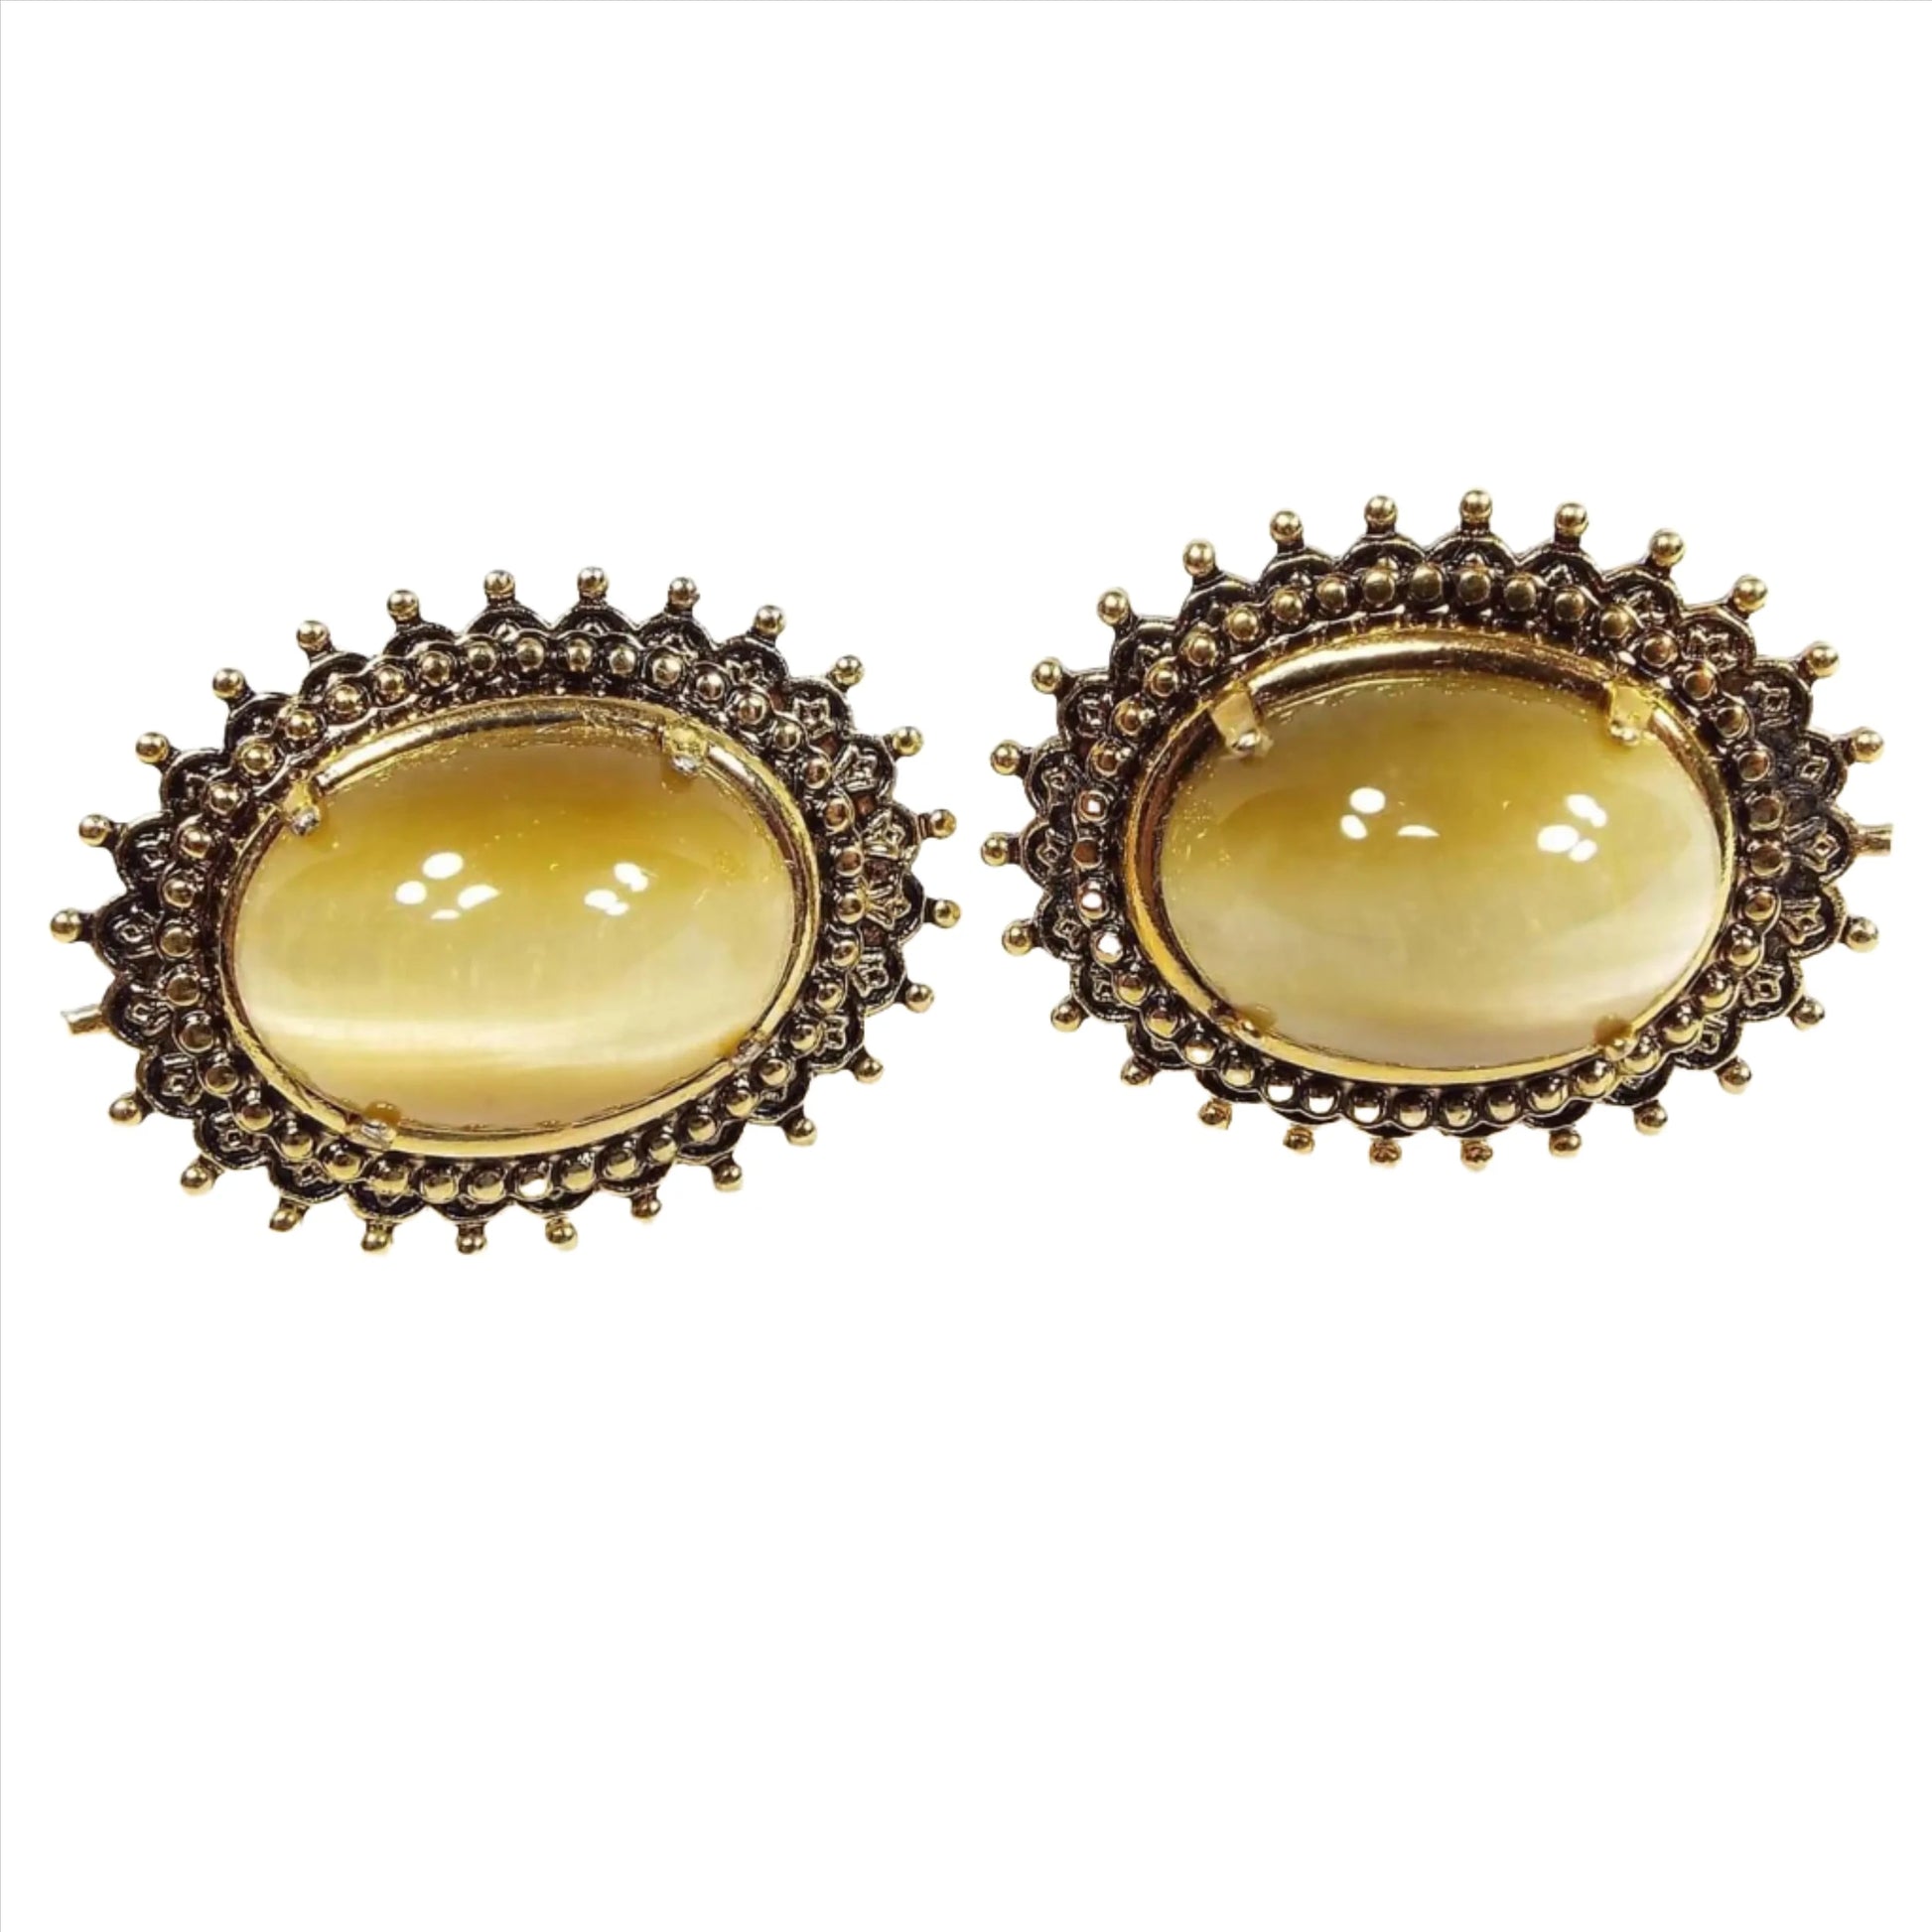 Front view of the retro vintage faux cat's eye cufflinks. The metal is oval shaped and antiqued gold in color with a spiky Brutalist style dot design. The glass cabs have shades of yellow and brown as you move around.